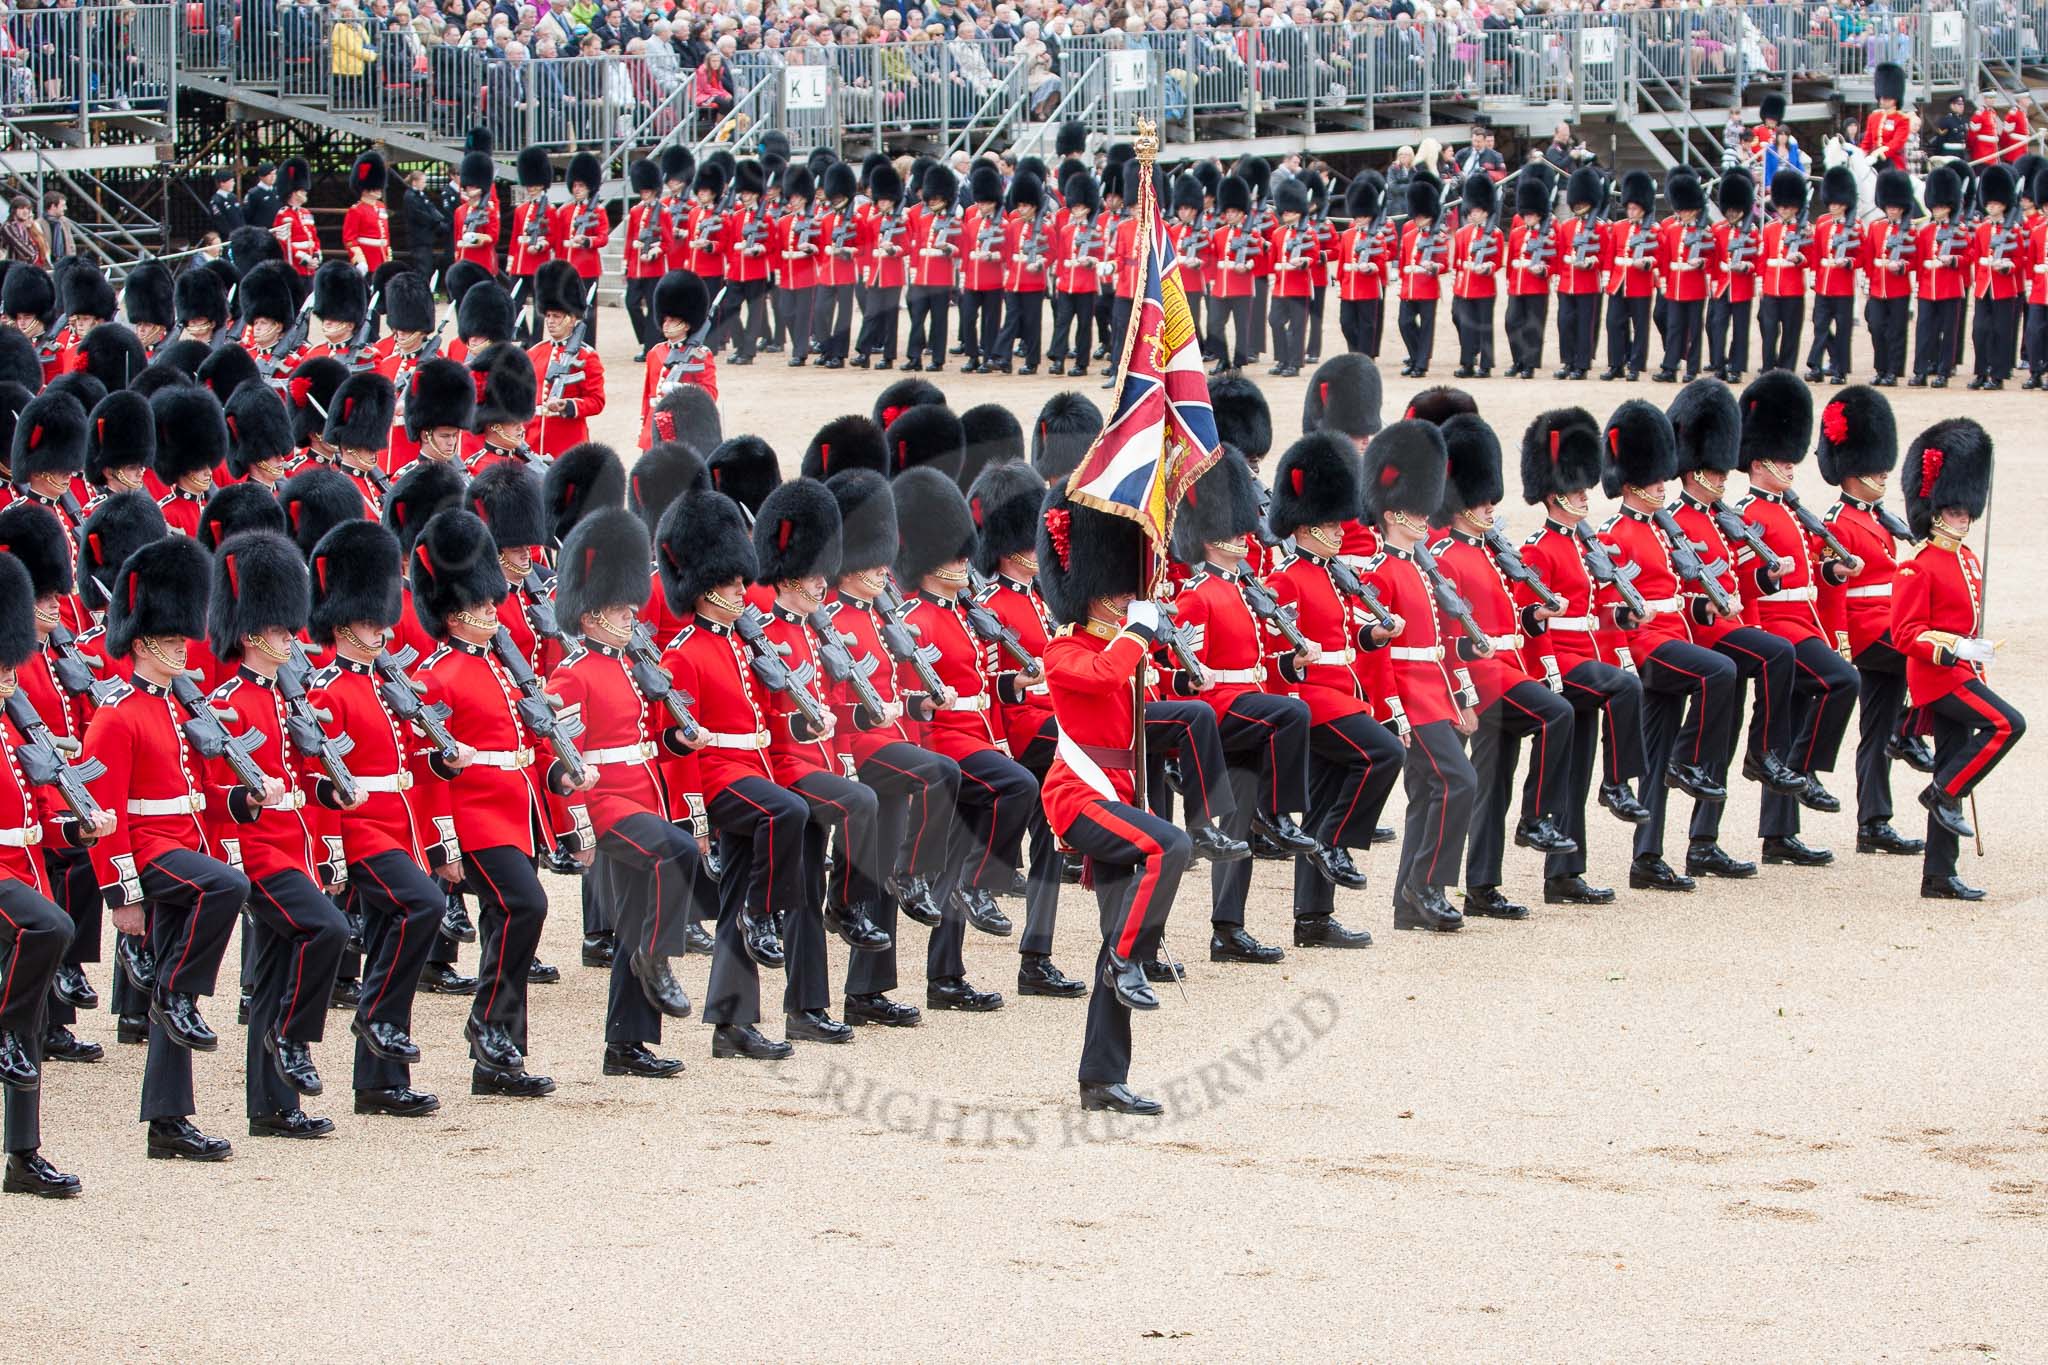 The Colonel's Review 2012: No. 1 Guard, the (Escort for the Colour), 1st Battalion Coldstream Guards, during the March Past..
Horse Guards Parade, Westminster,
London SW1,

United Kingdom,
on 09 June 2012 at 11:33, image #316